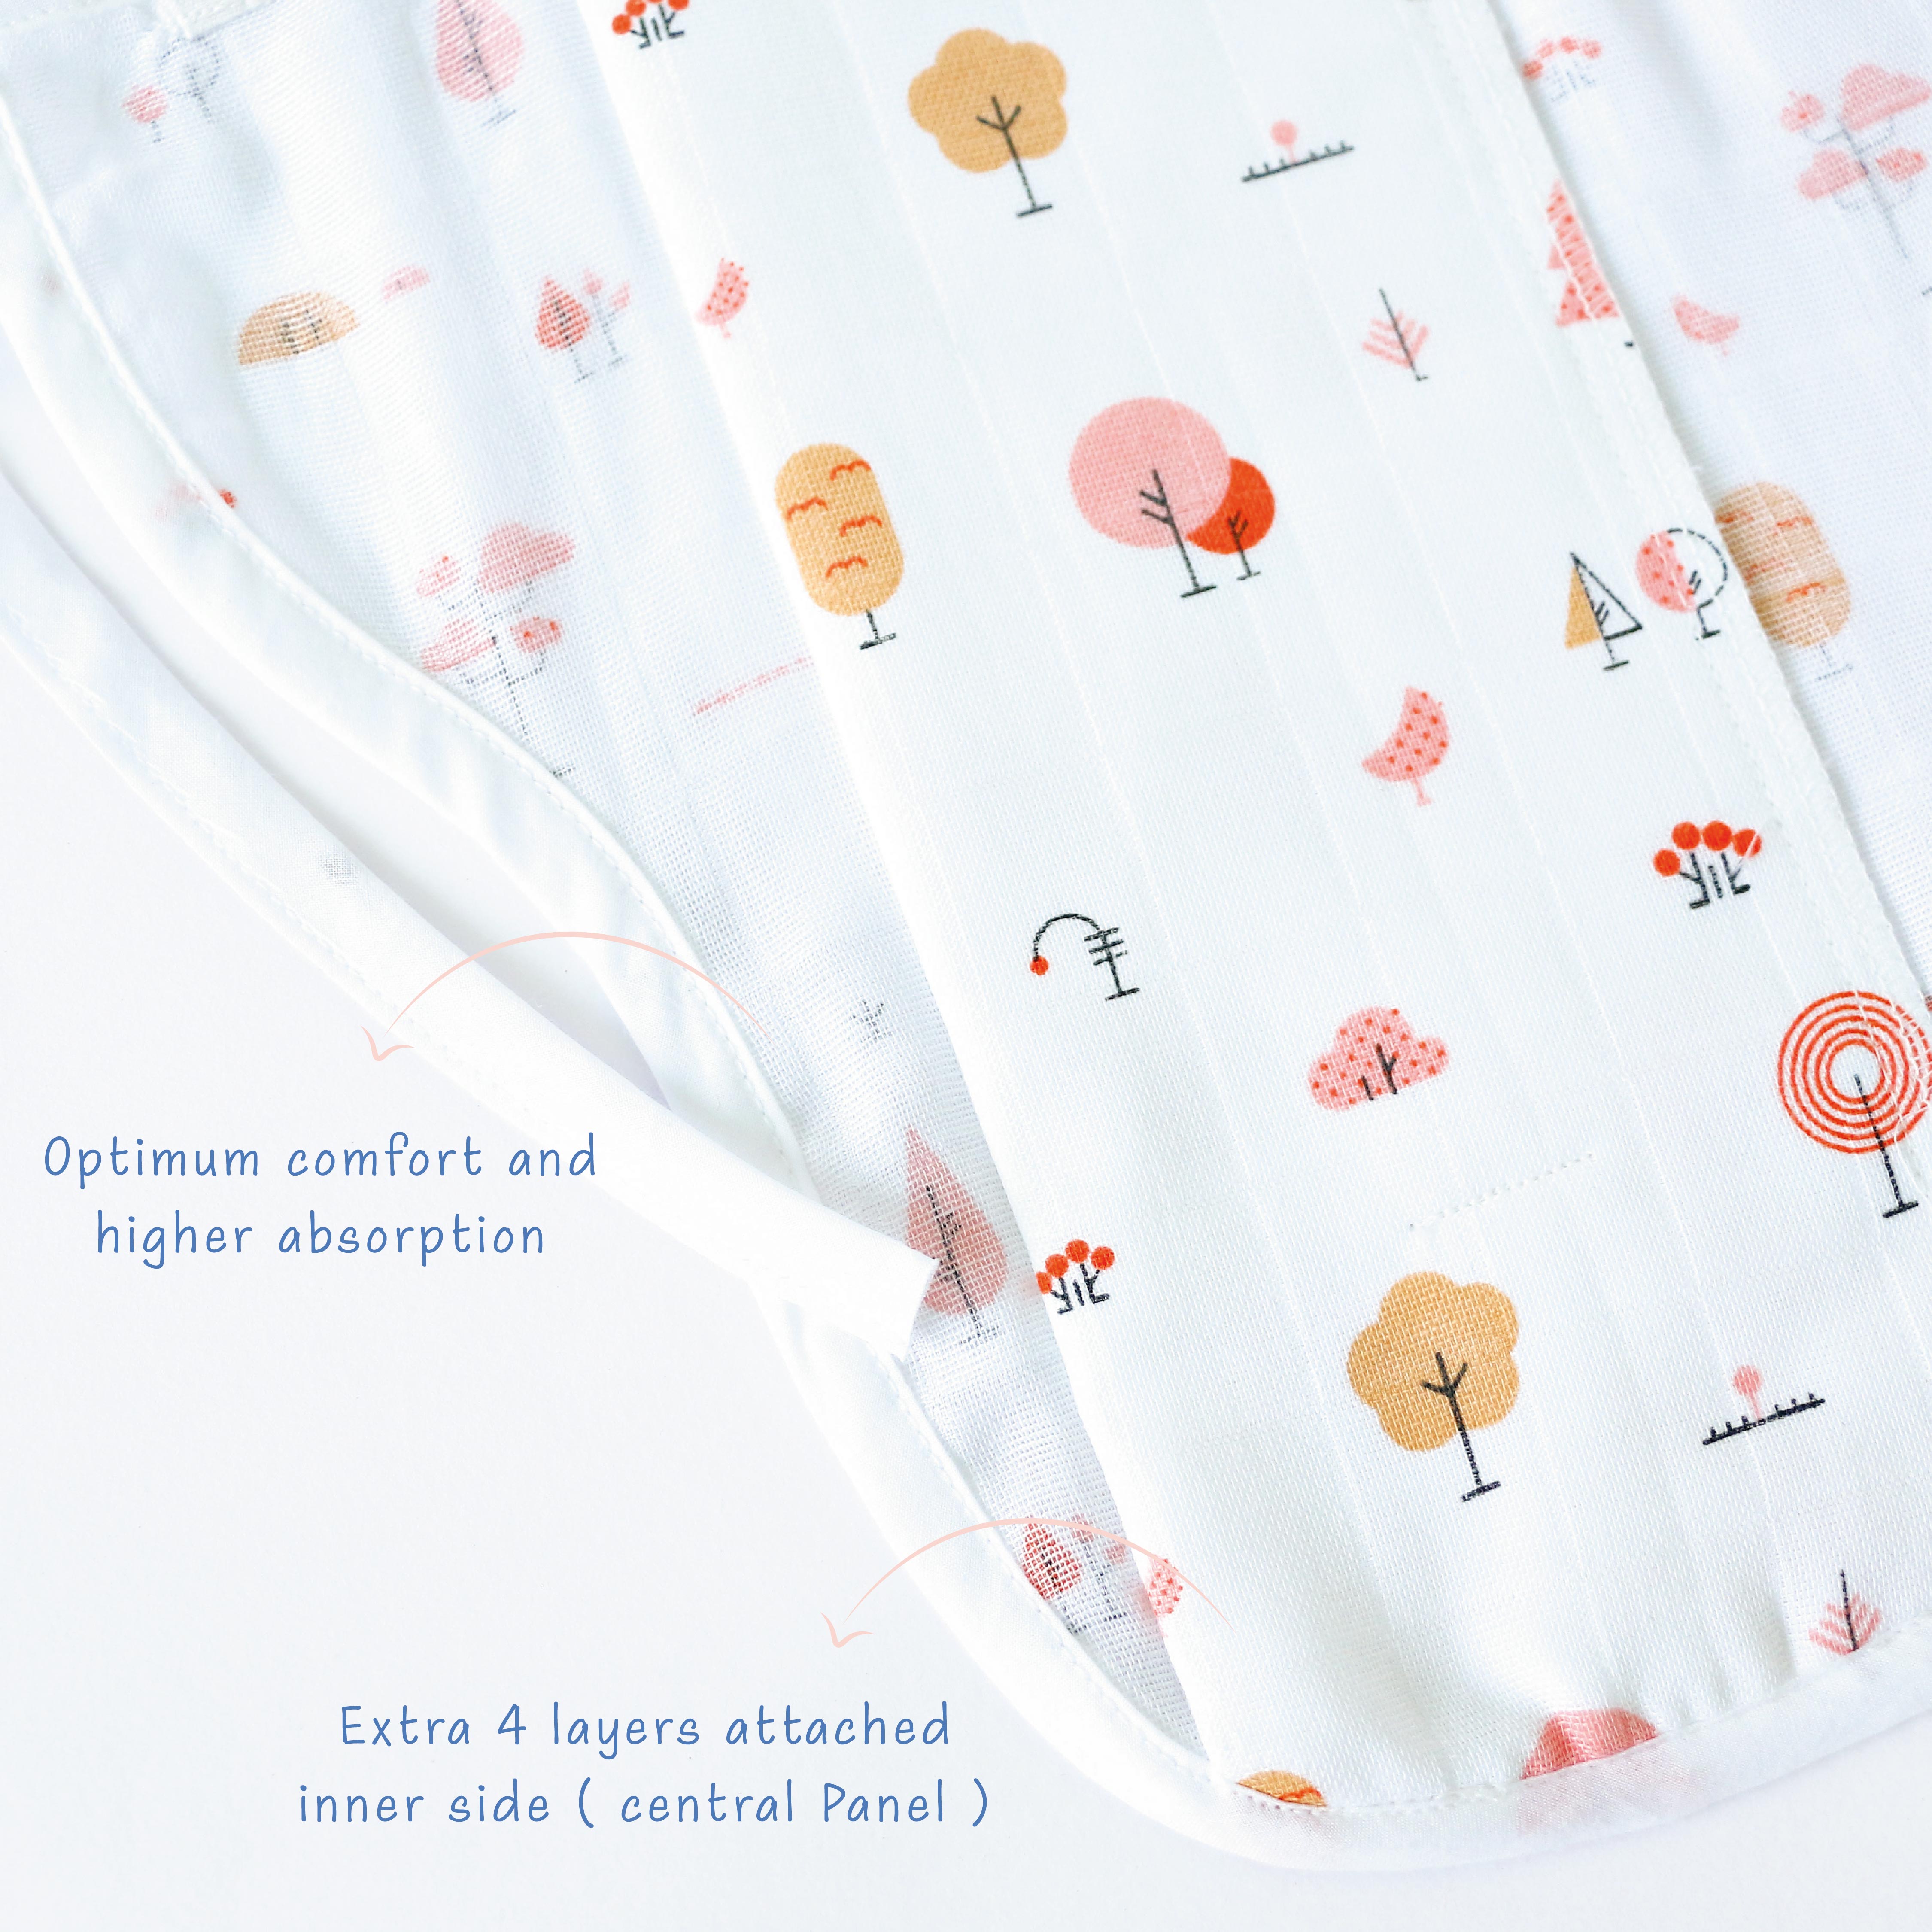 Unisex Muslin Knot Jablas-5 & Nappies-5 ( Assorted Pack of 10 ) newborn to 4 months